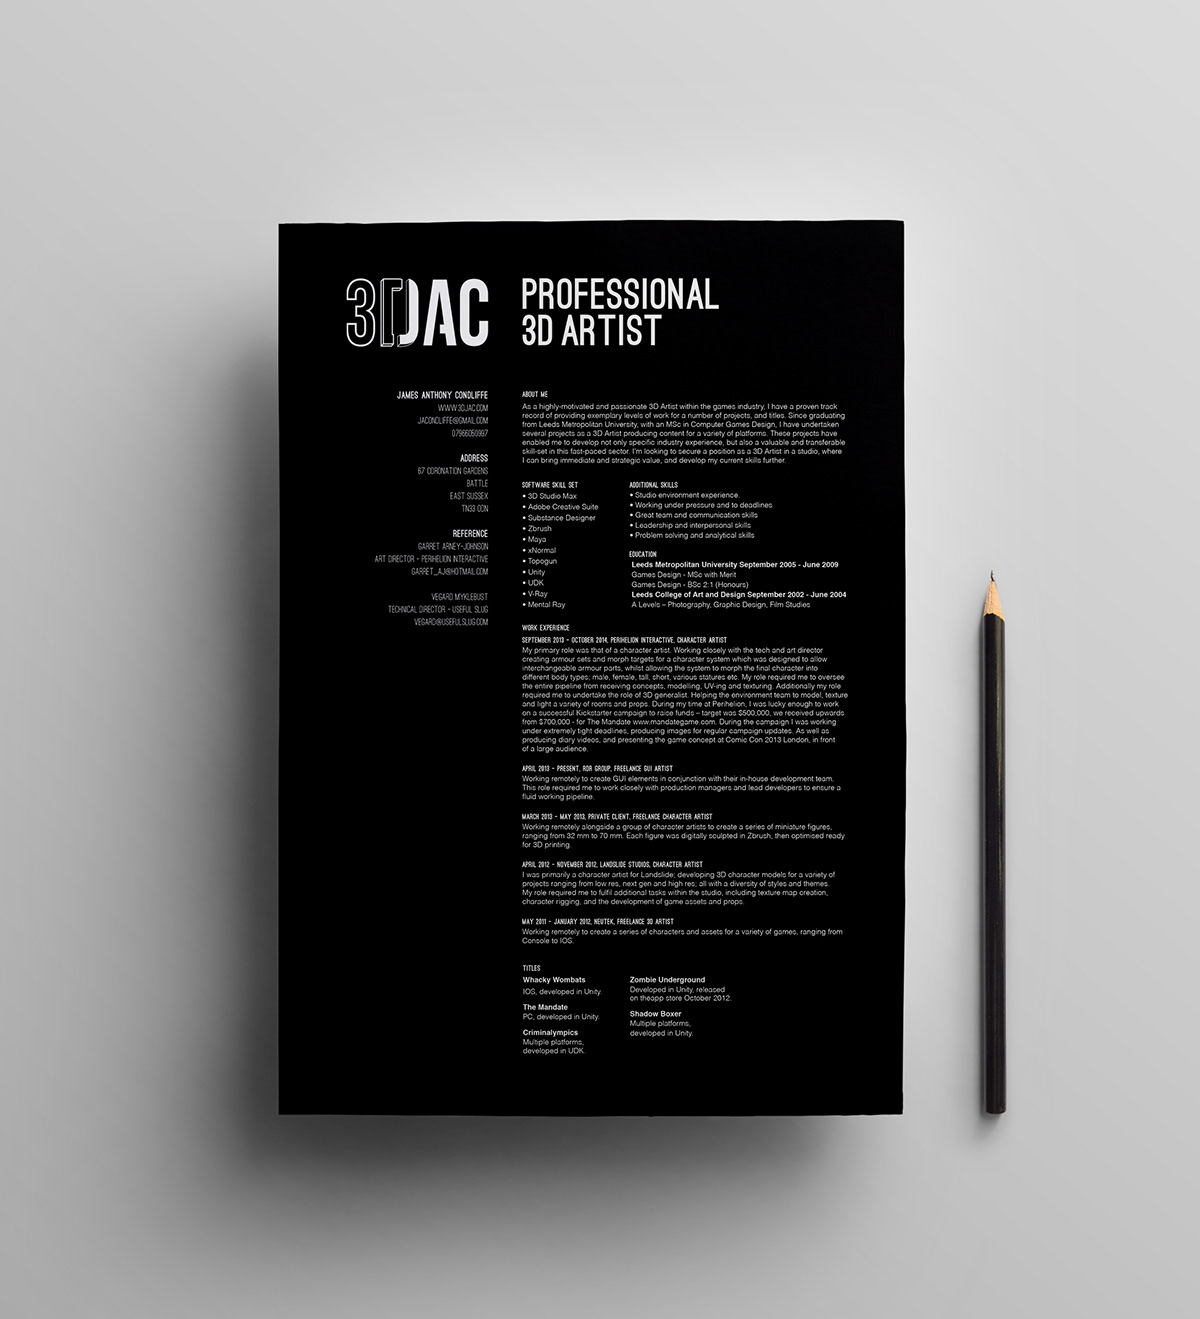 3DJAC logo brand CV business card black and white simple bold 3d artist Jimmy Condliffe James Anthony Condliffe